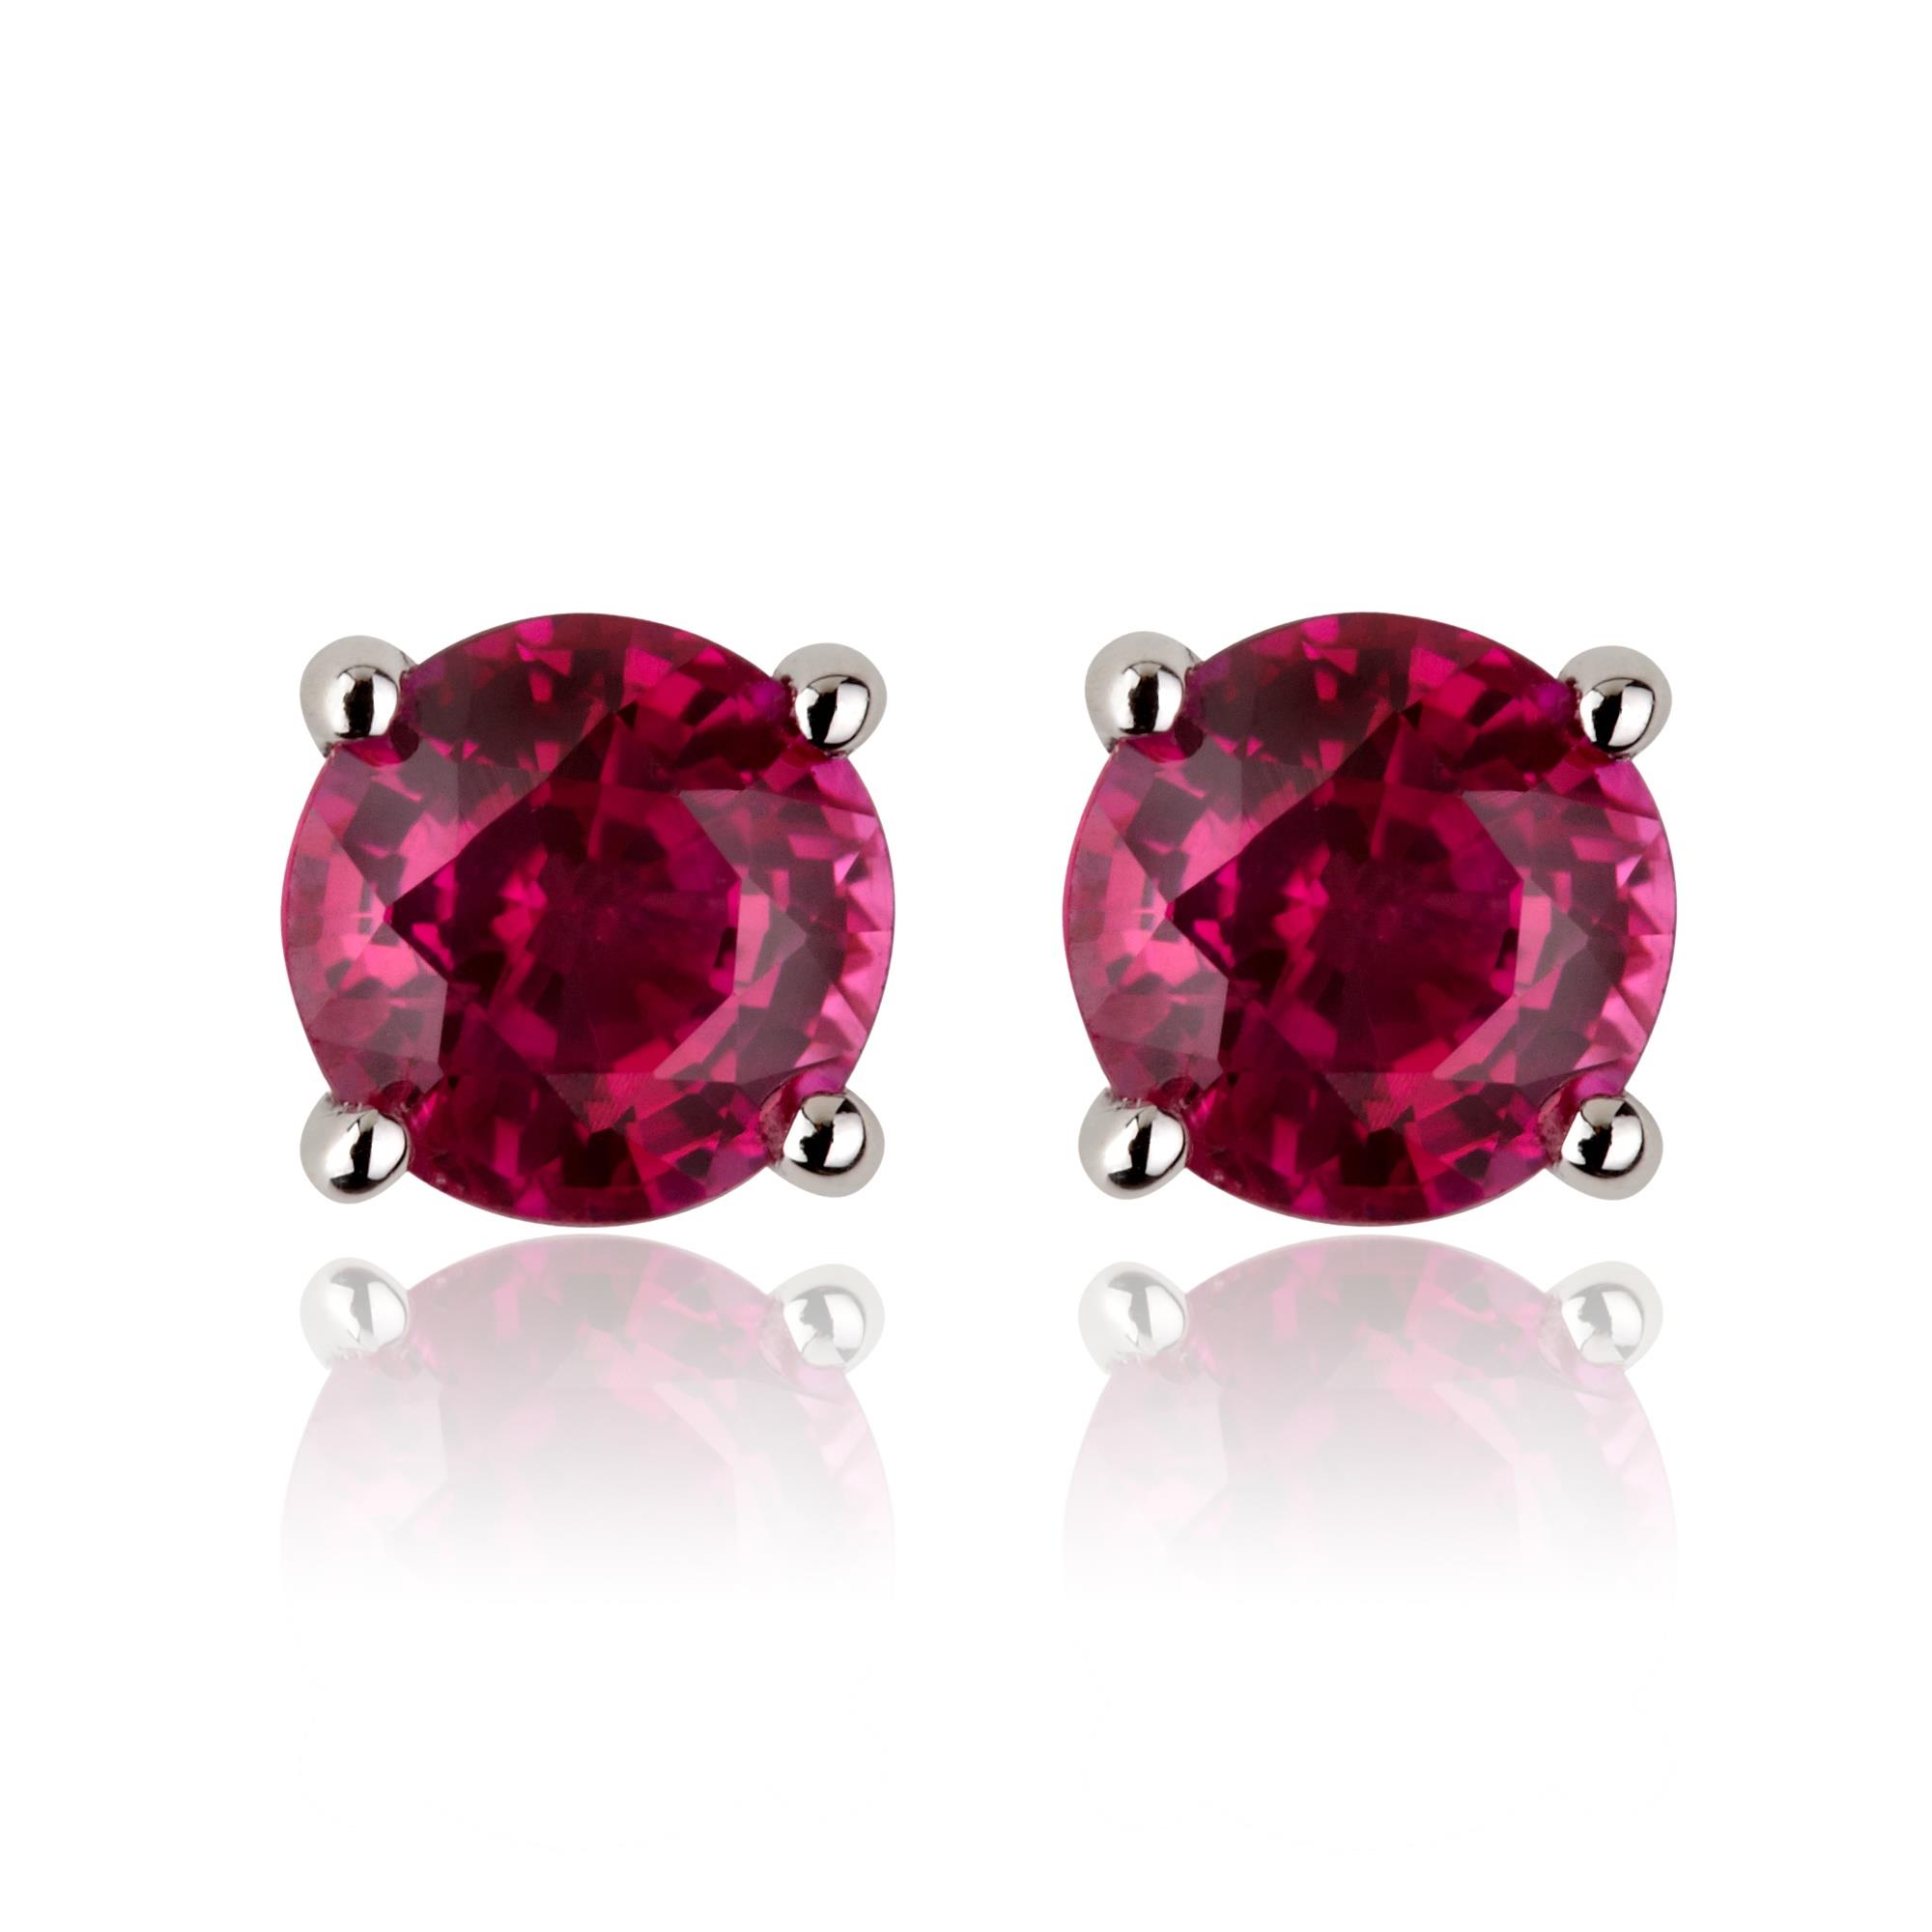 18ct White Gold Ruby Solitaire Stud Earrings | Pravins Jewellers